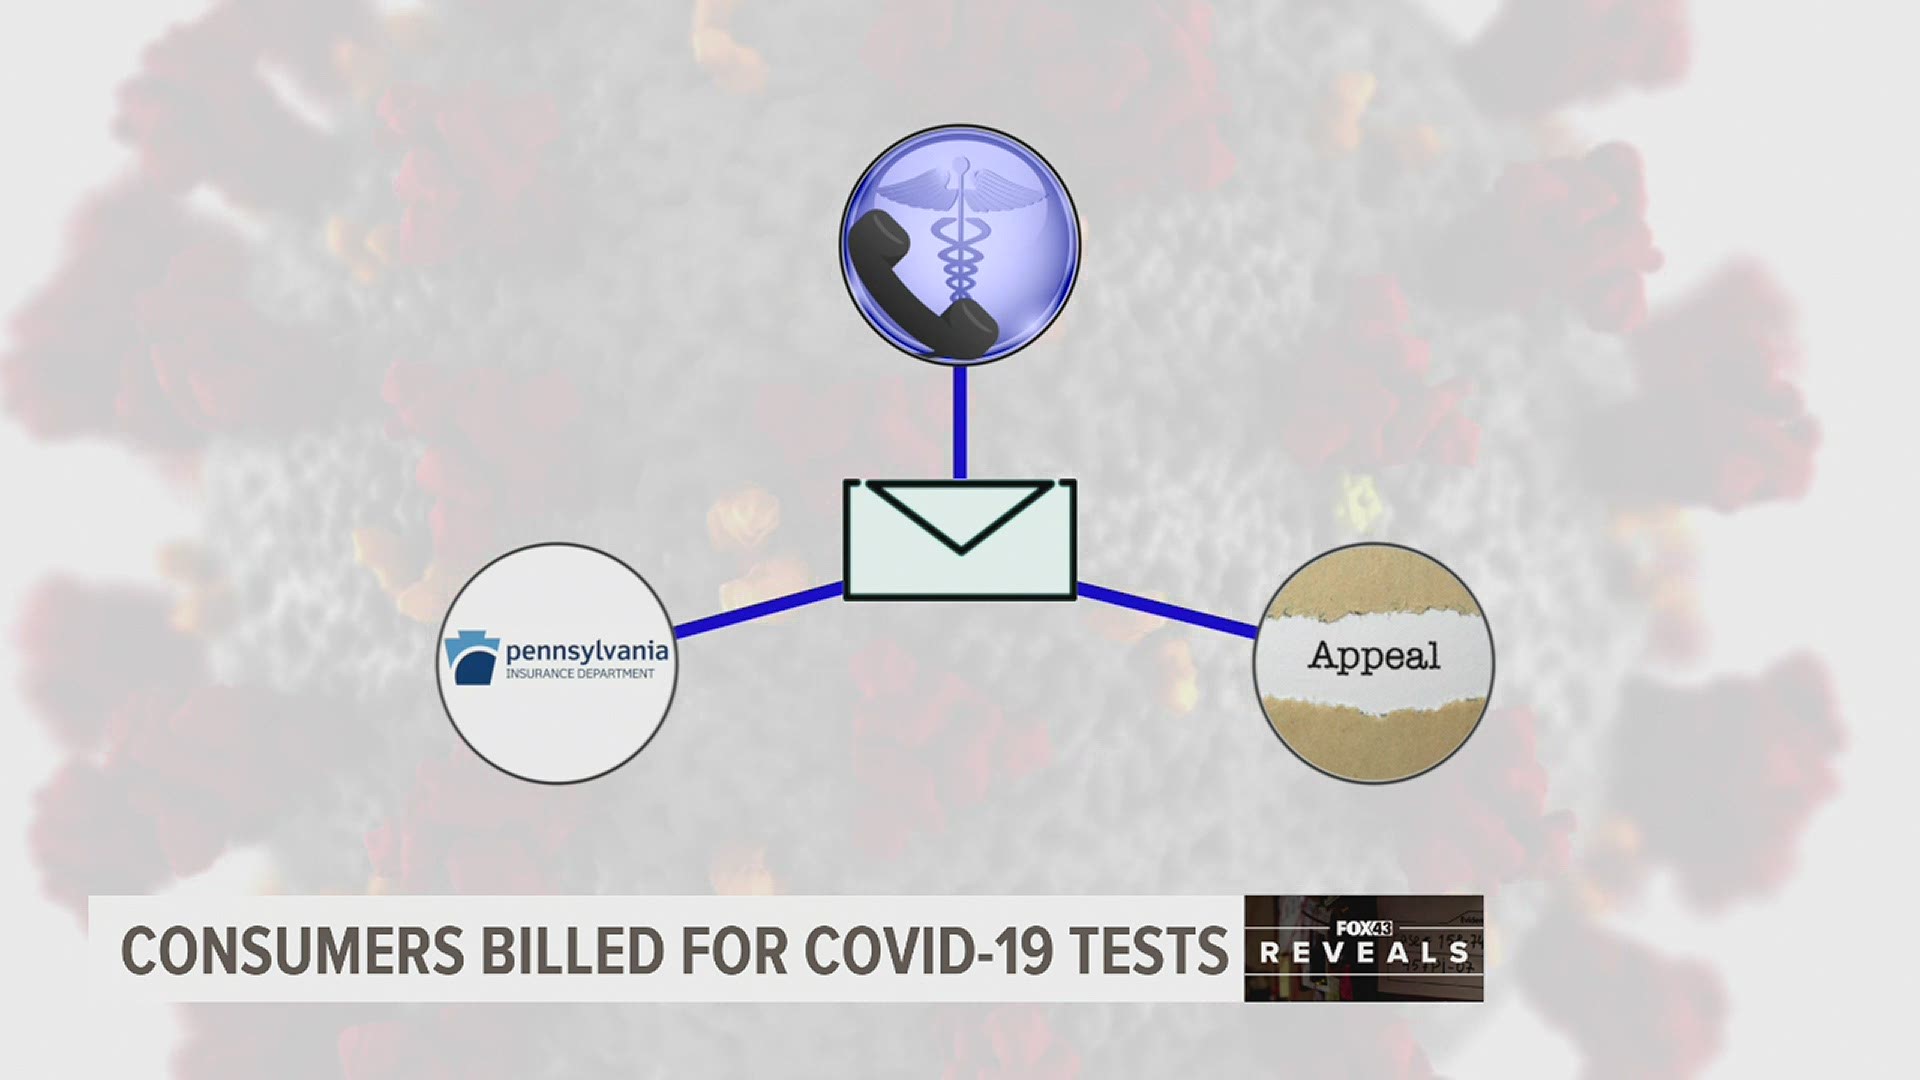 Insurance companies have not been covering the costs of every COVID-19 test, leaving some patients with surprise testing fees.